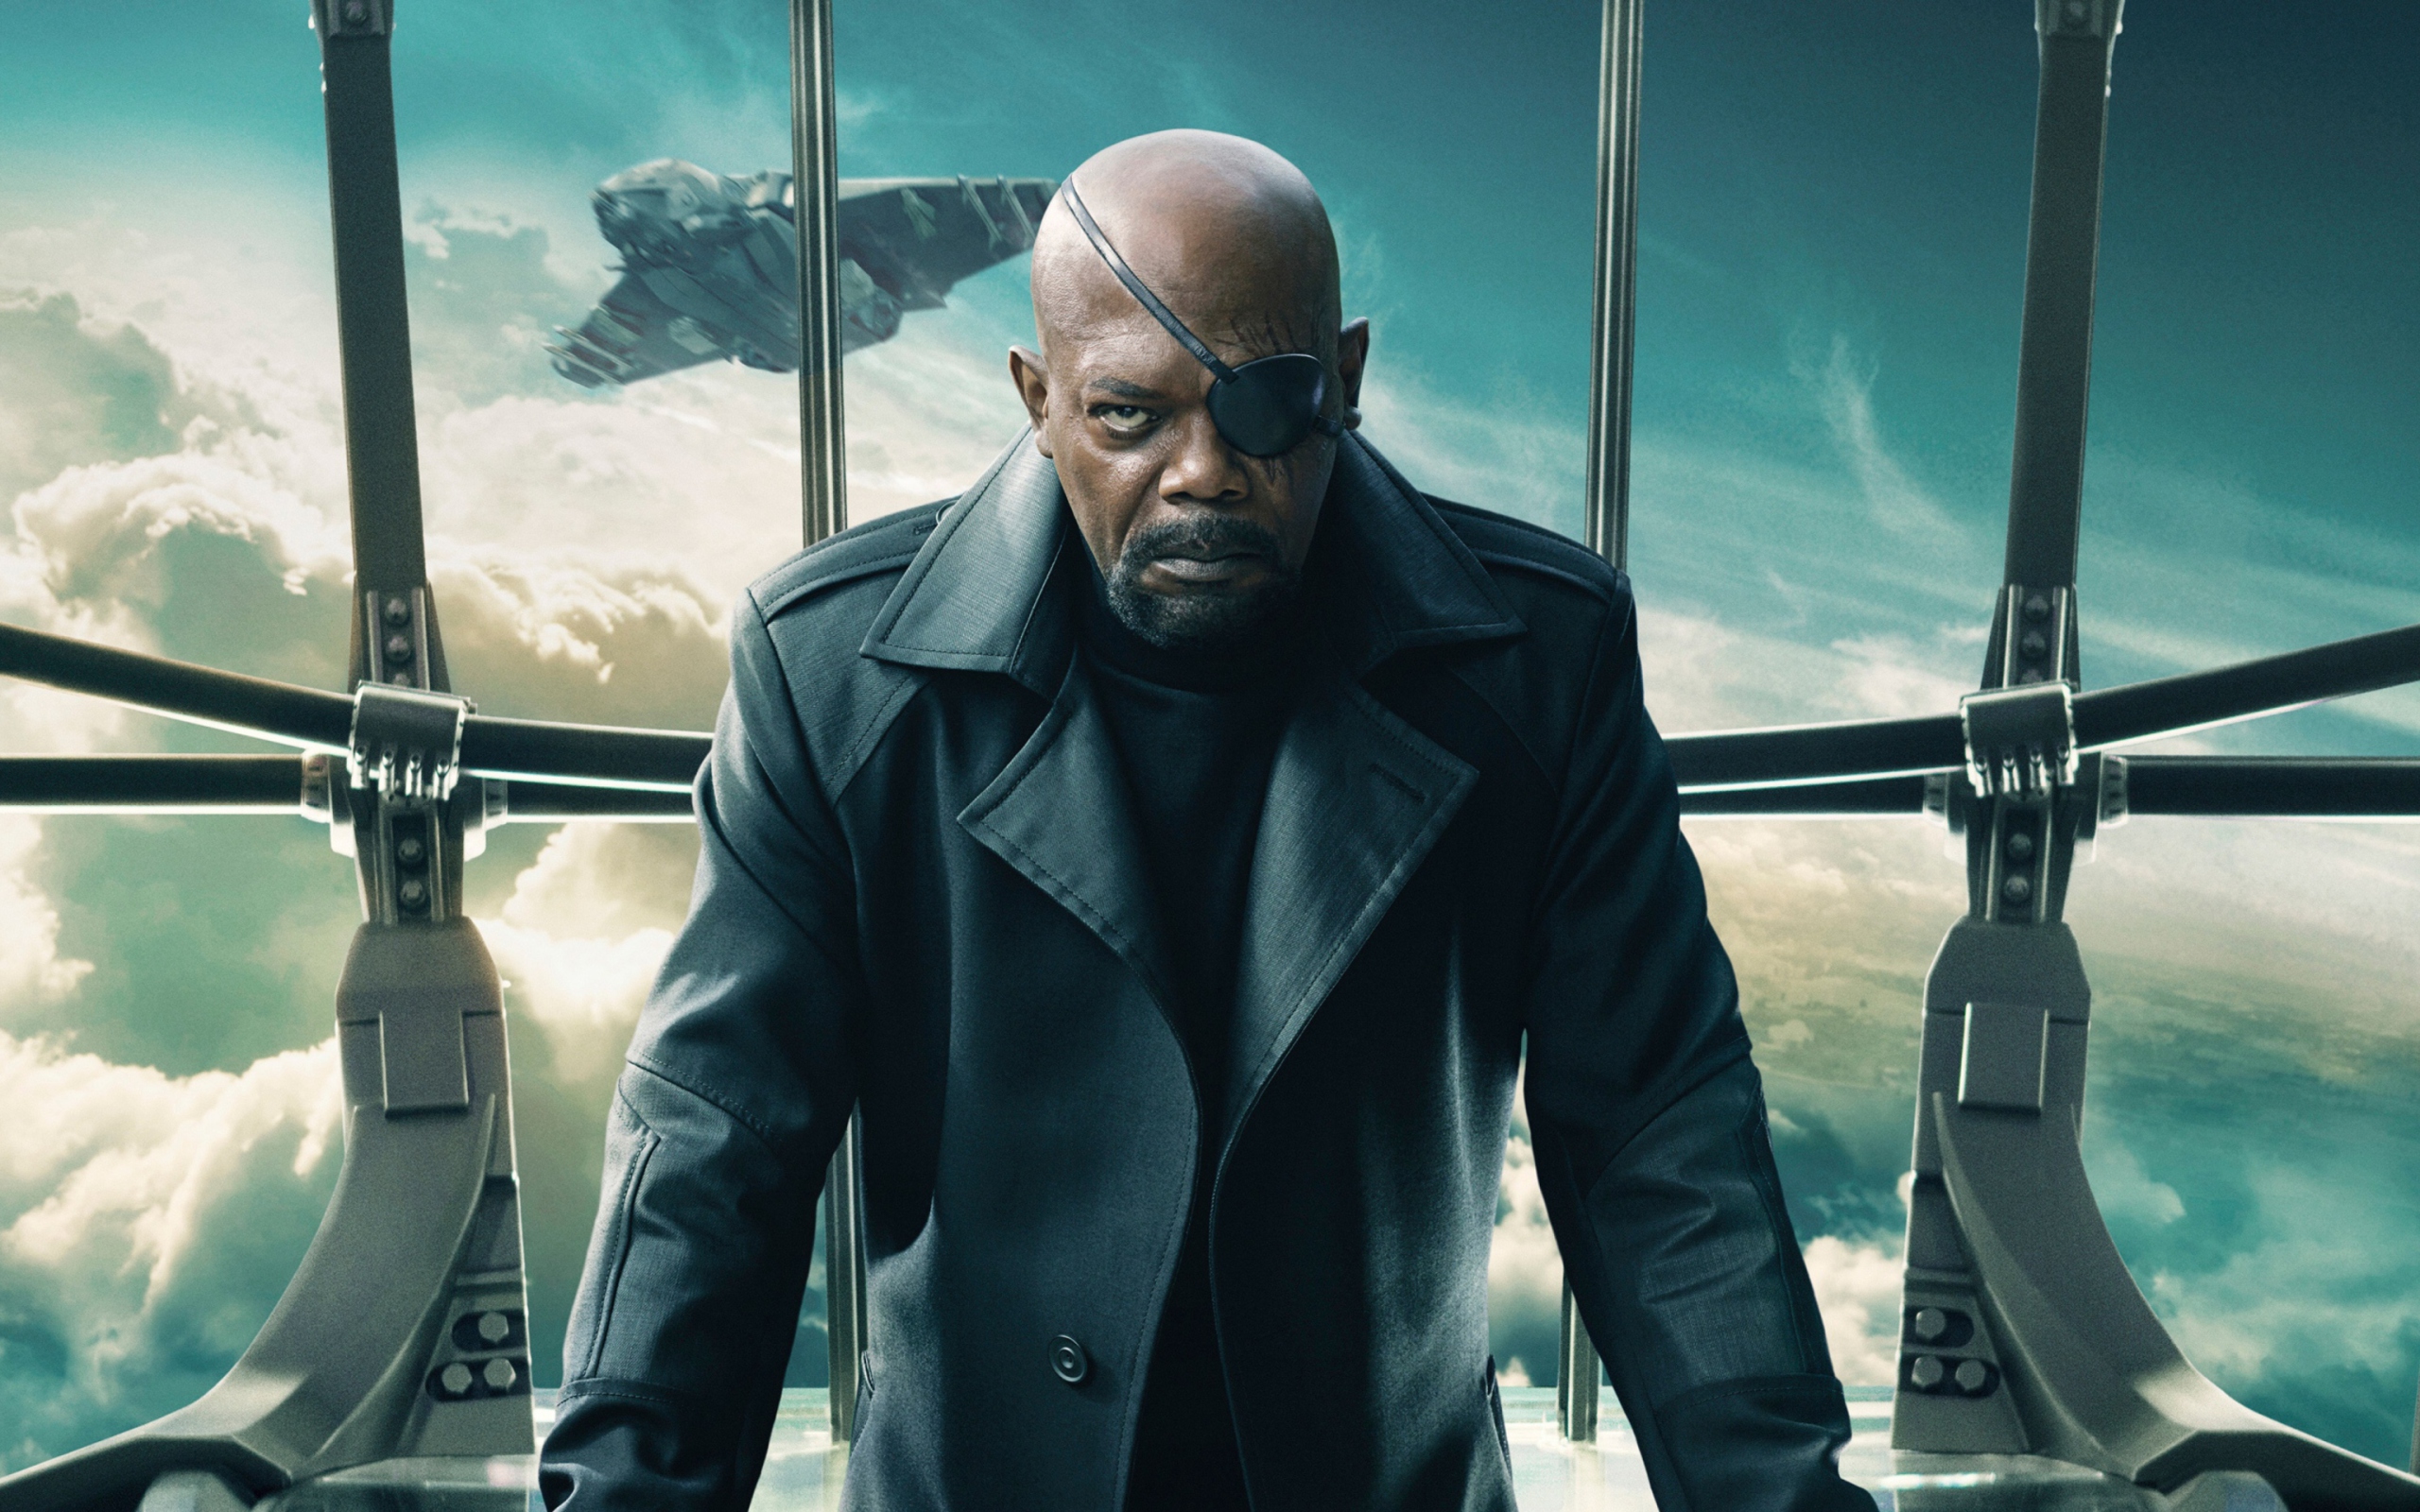 Nick Fury Captain America The Winter Soldier wallpaper 2560x1600